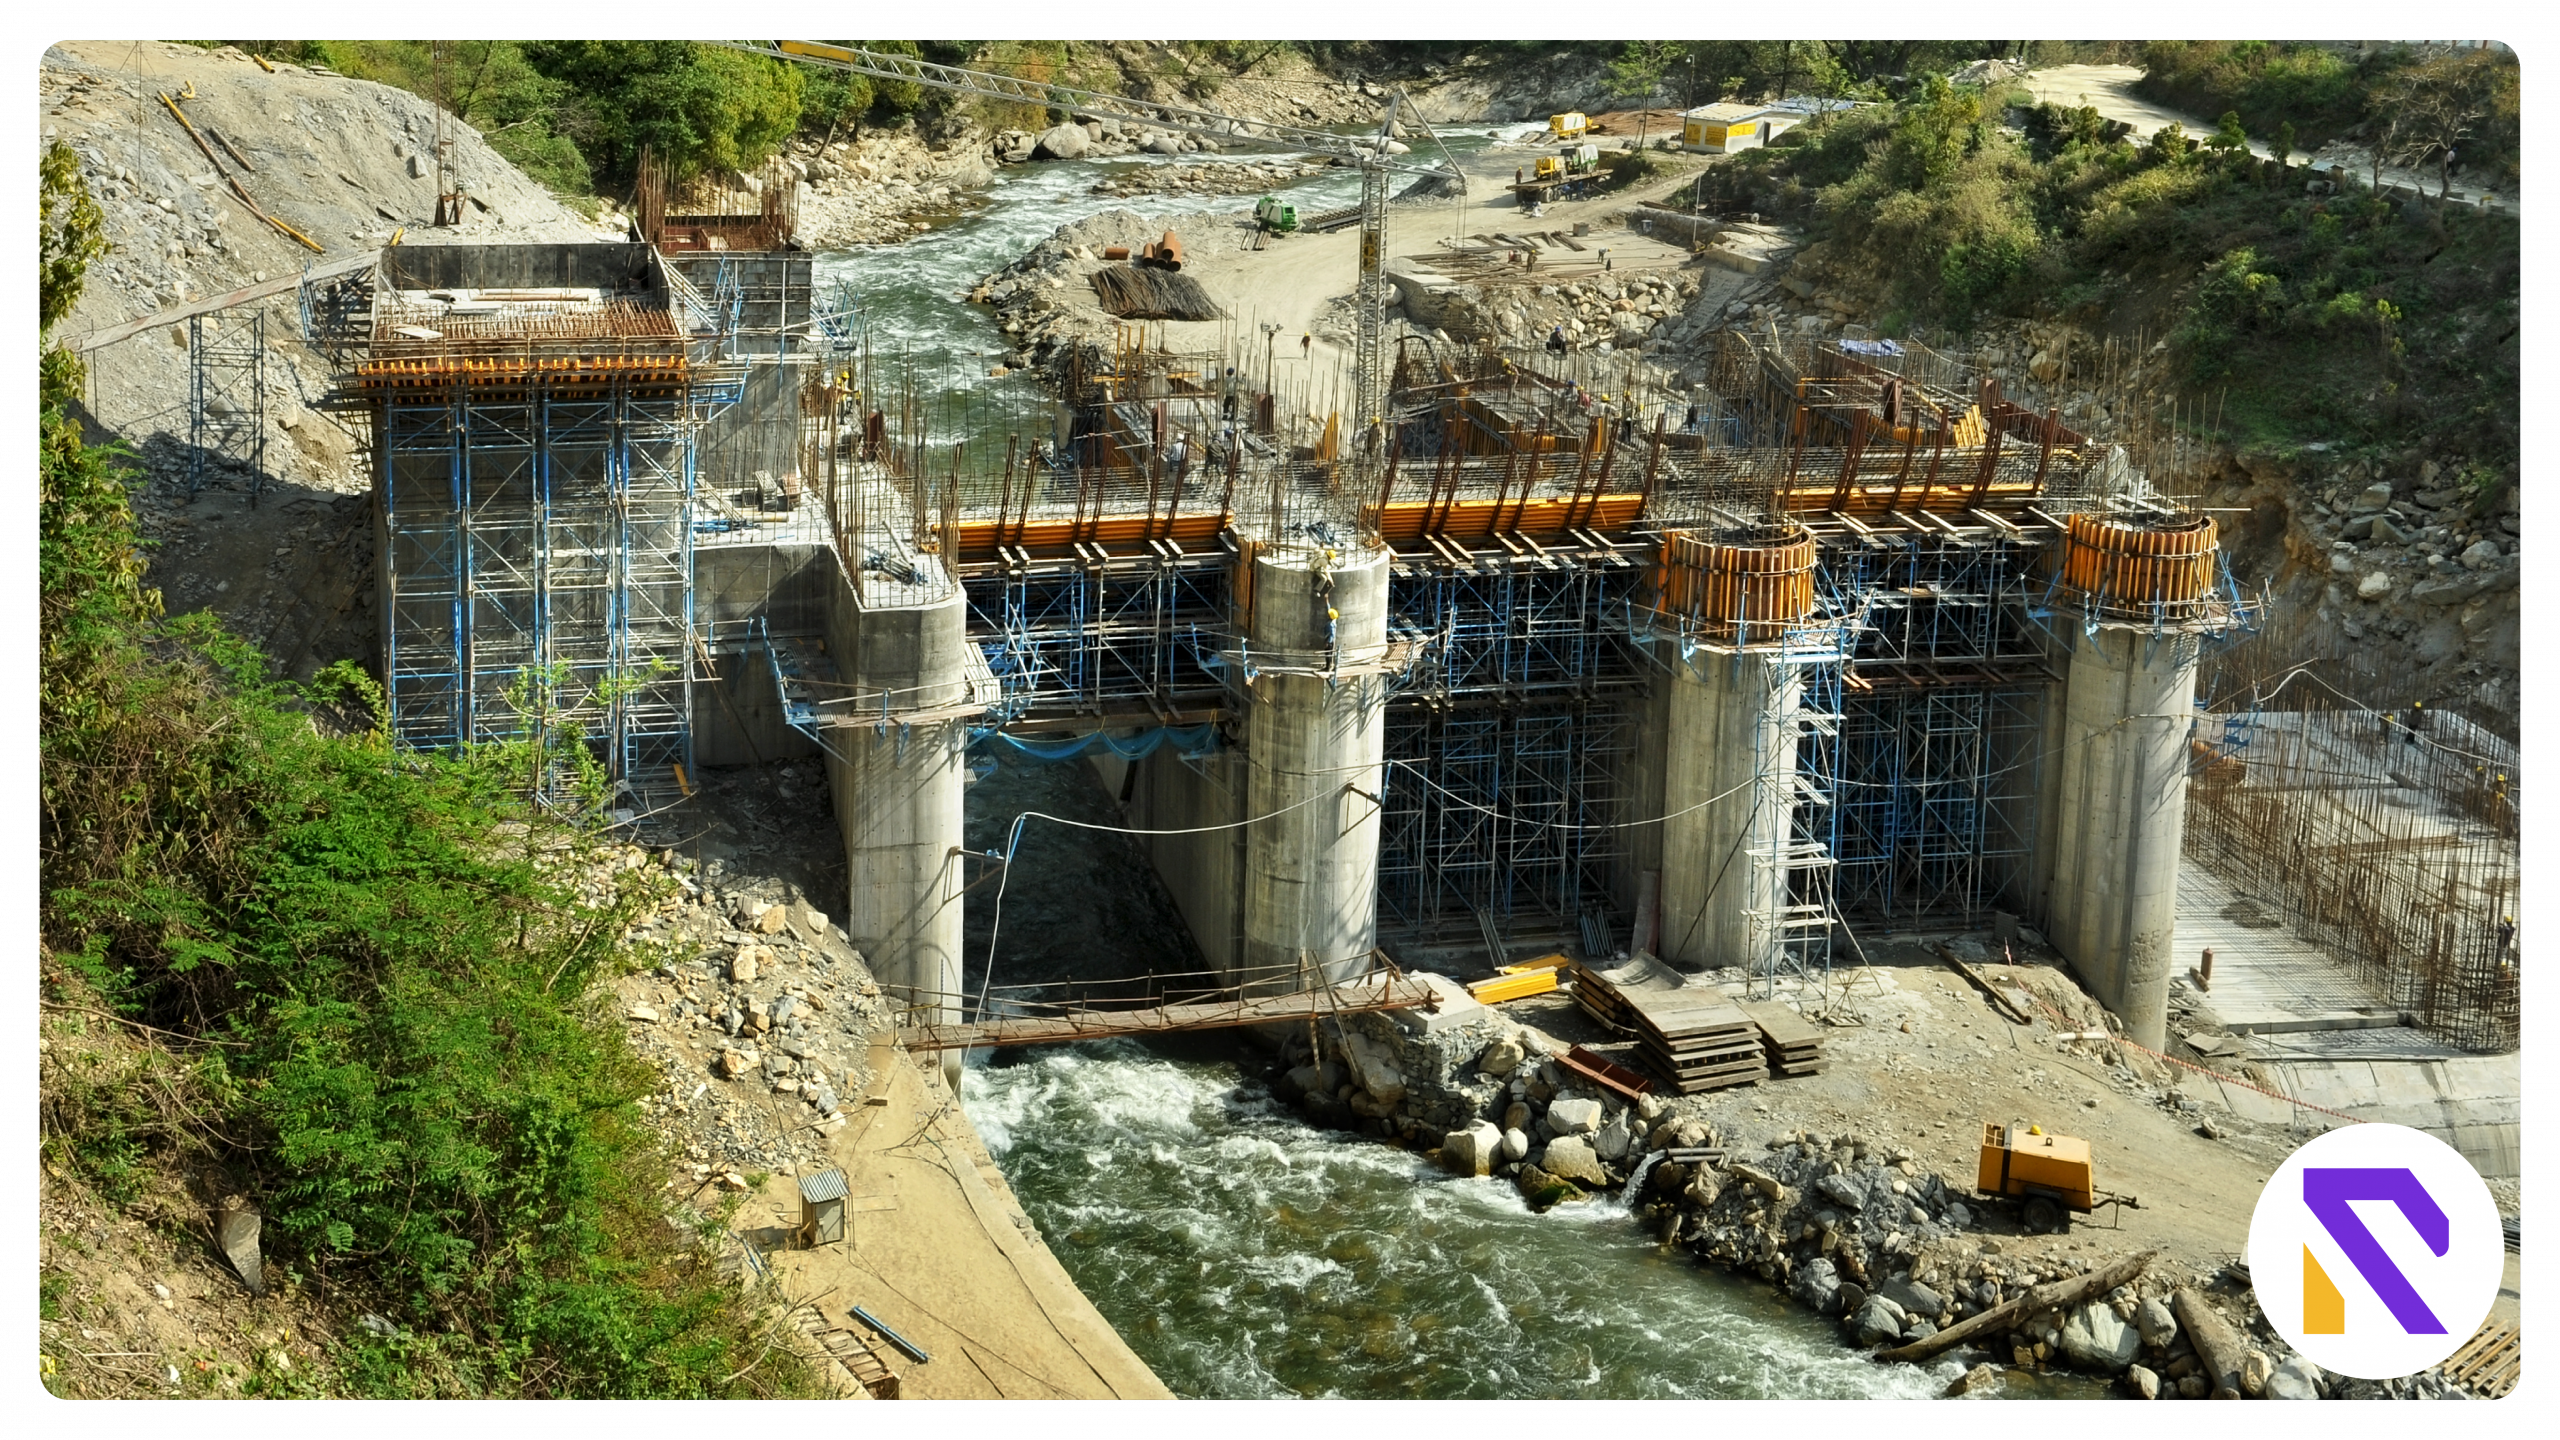 105 billion granted by Government for the construction of various dams